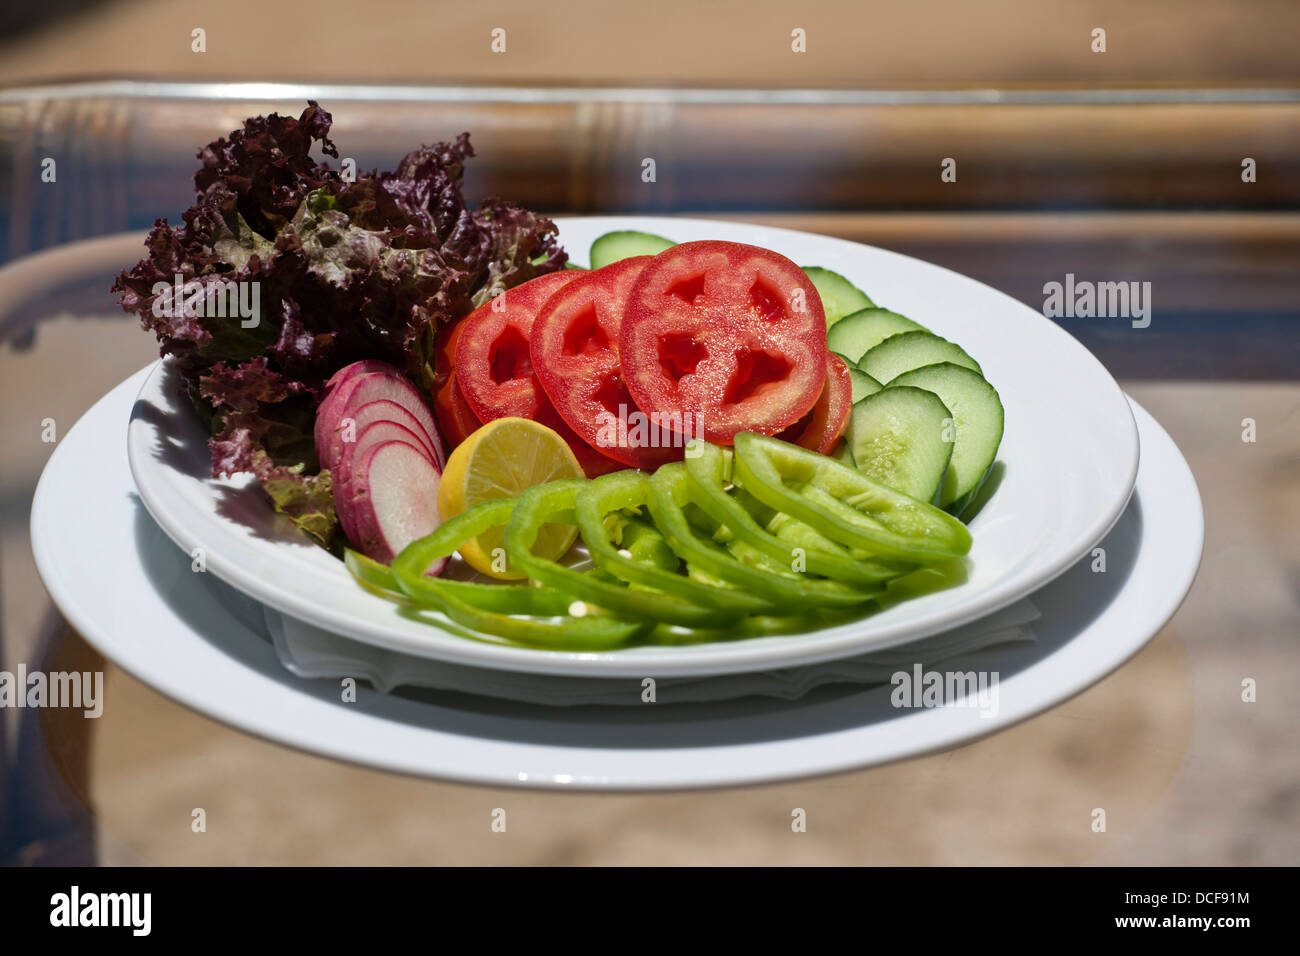 Shallow focus image of a red and green pepper salad outdoors Stock Photo